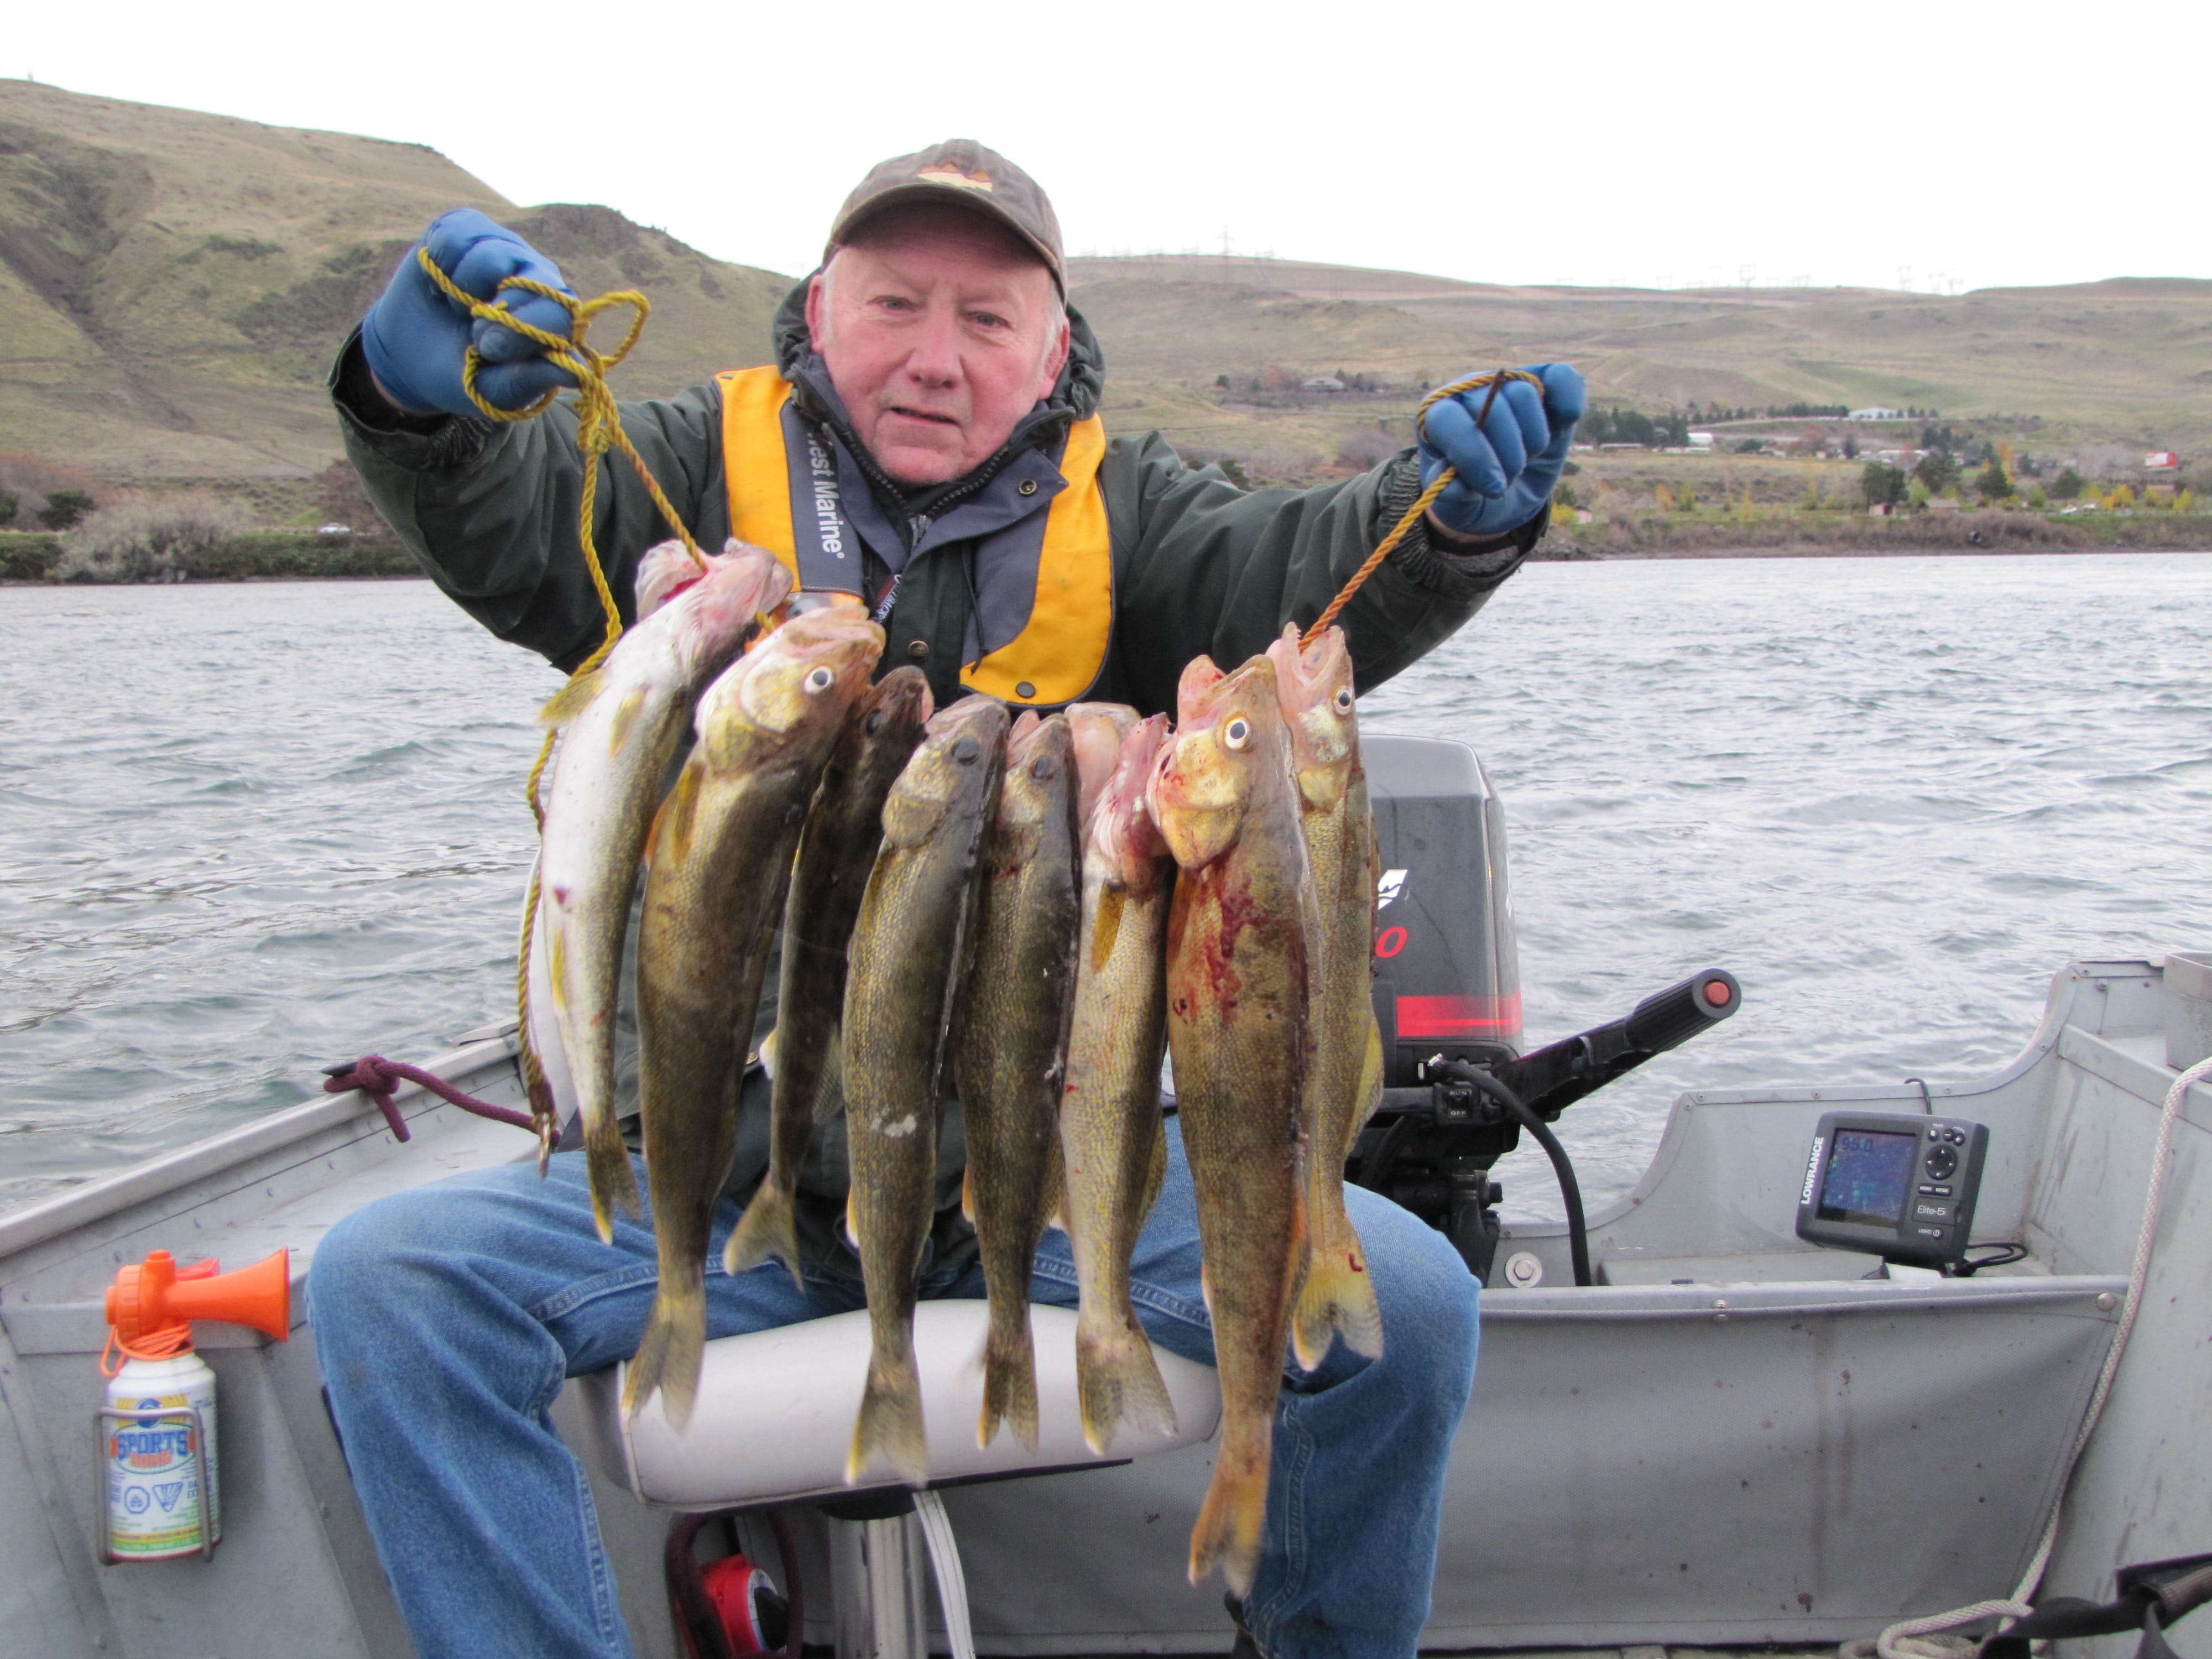 Dick Borneman of Vancouver with a string of walleye taken last weekend from the upper end of The Dalles pool of the Columbia River near Rufus, Ore.